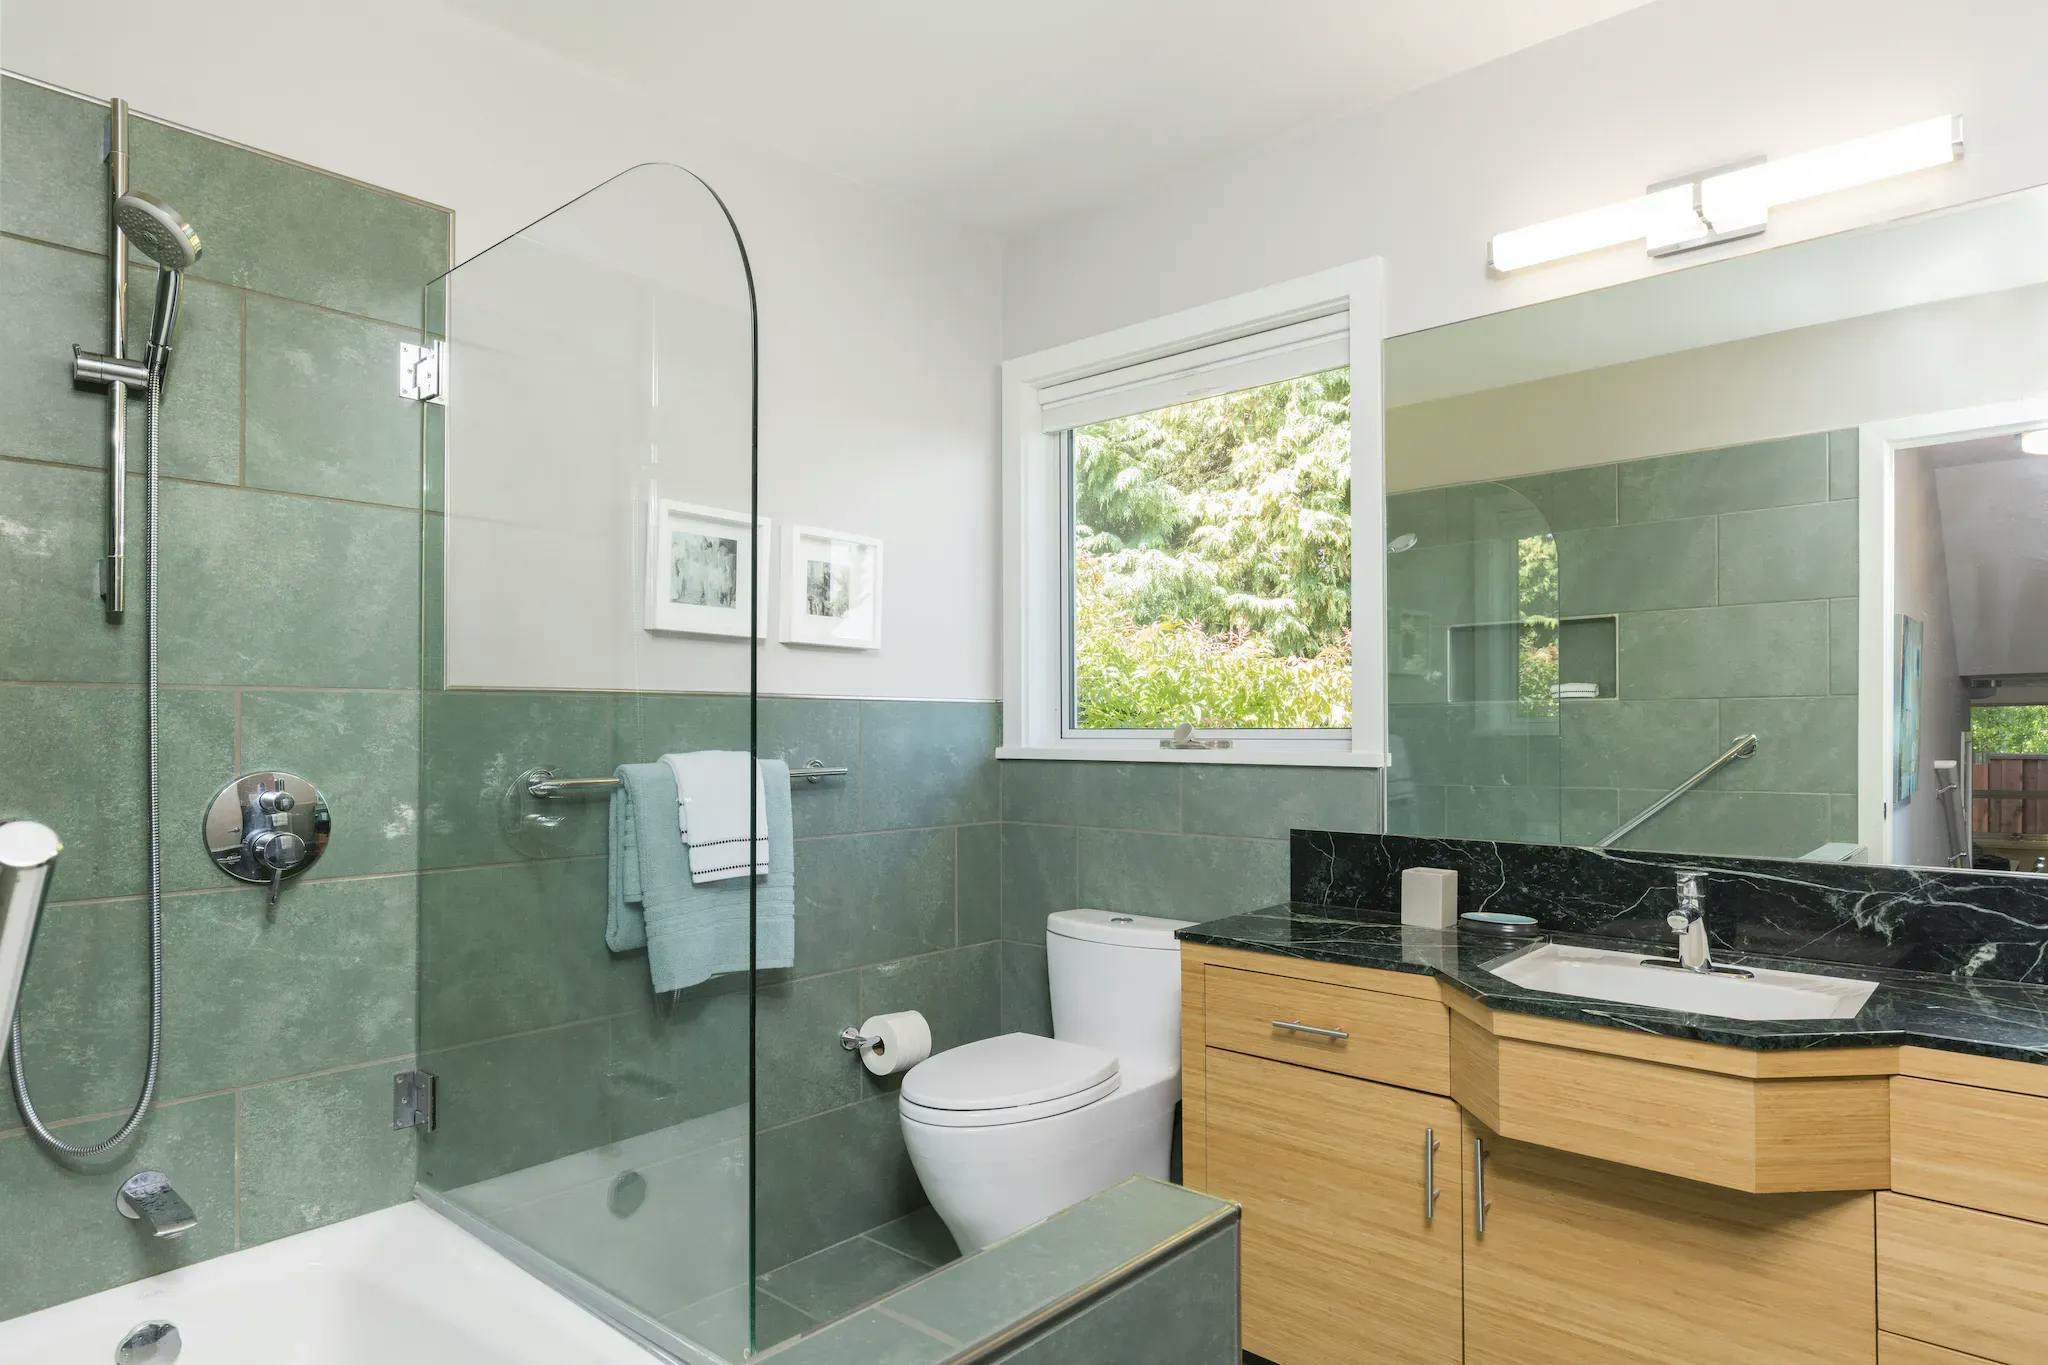 Green-tiled bathroom setting with a rectangle mirror above the vanity. The focus is on the glass panel over the bathtub